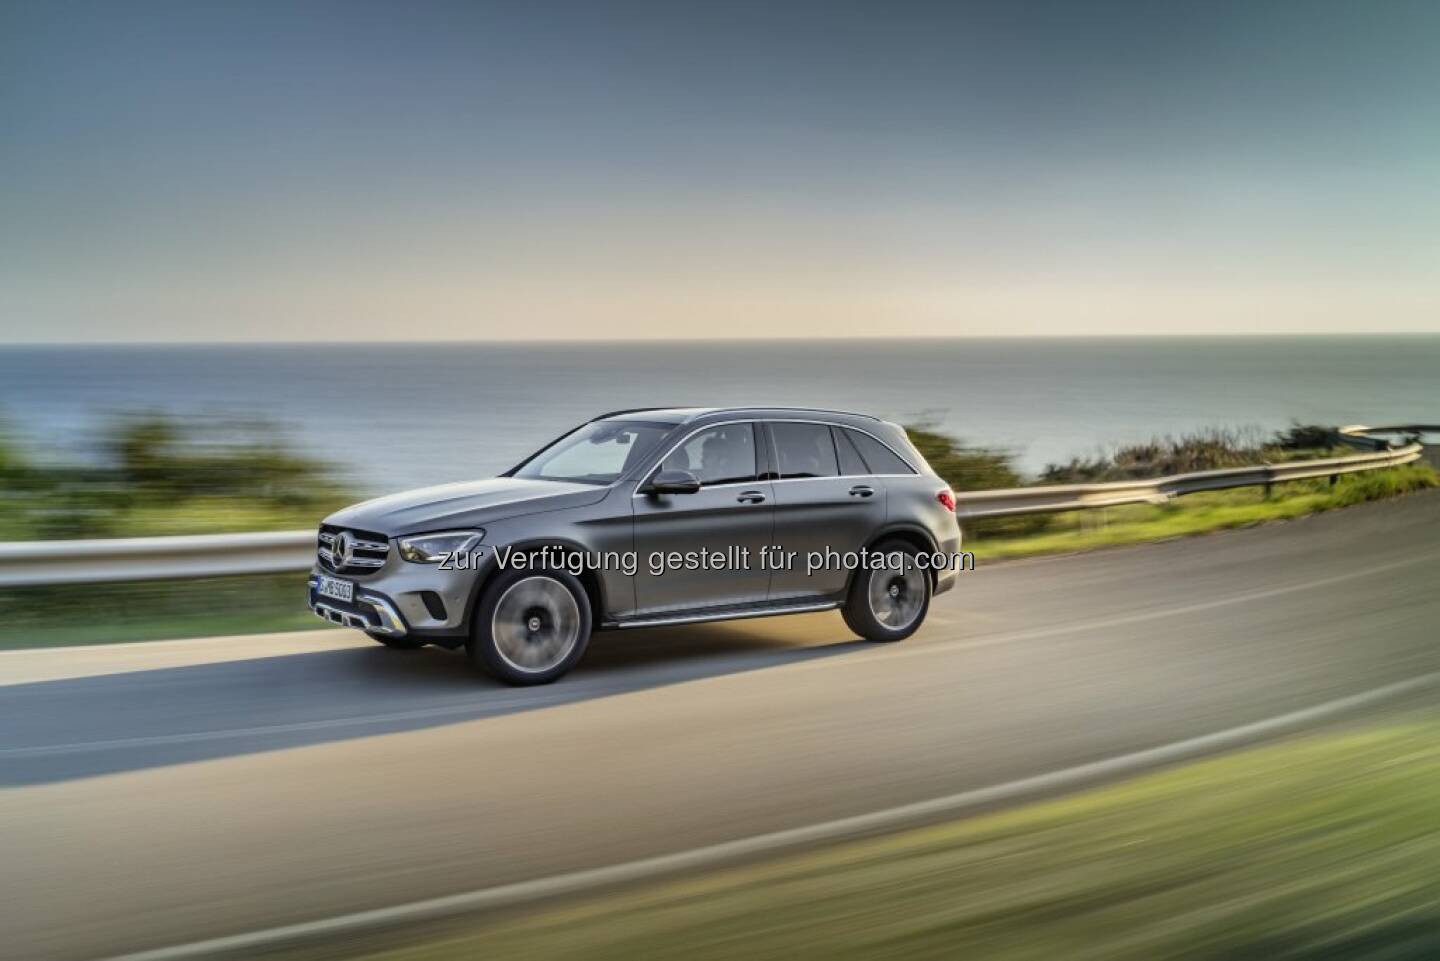 On average, 95 per cent of a GLC can be recycled. 

#Daimler #Sustainability https://twitter.com/Daimler/status/1161140423307476992/photo/1  Source: http://facebook.com/daimler